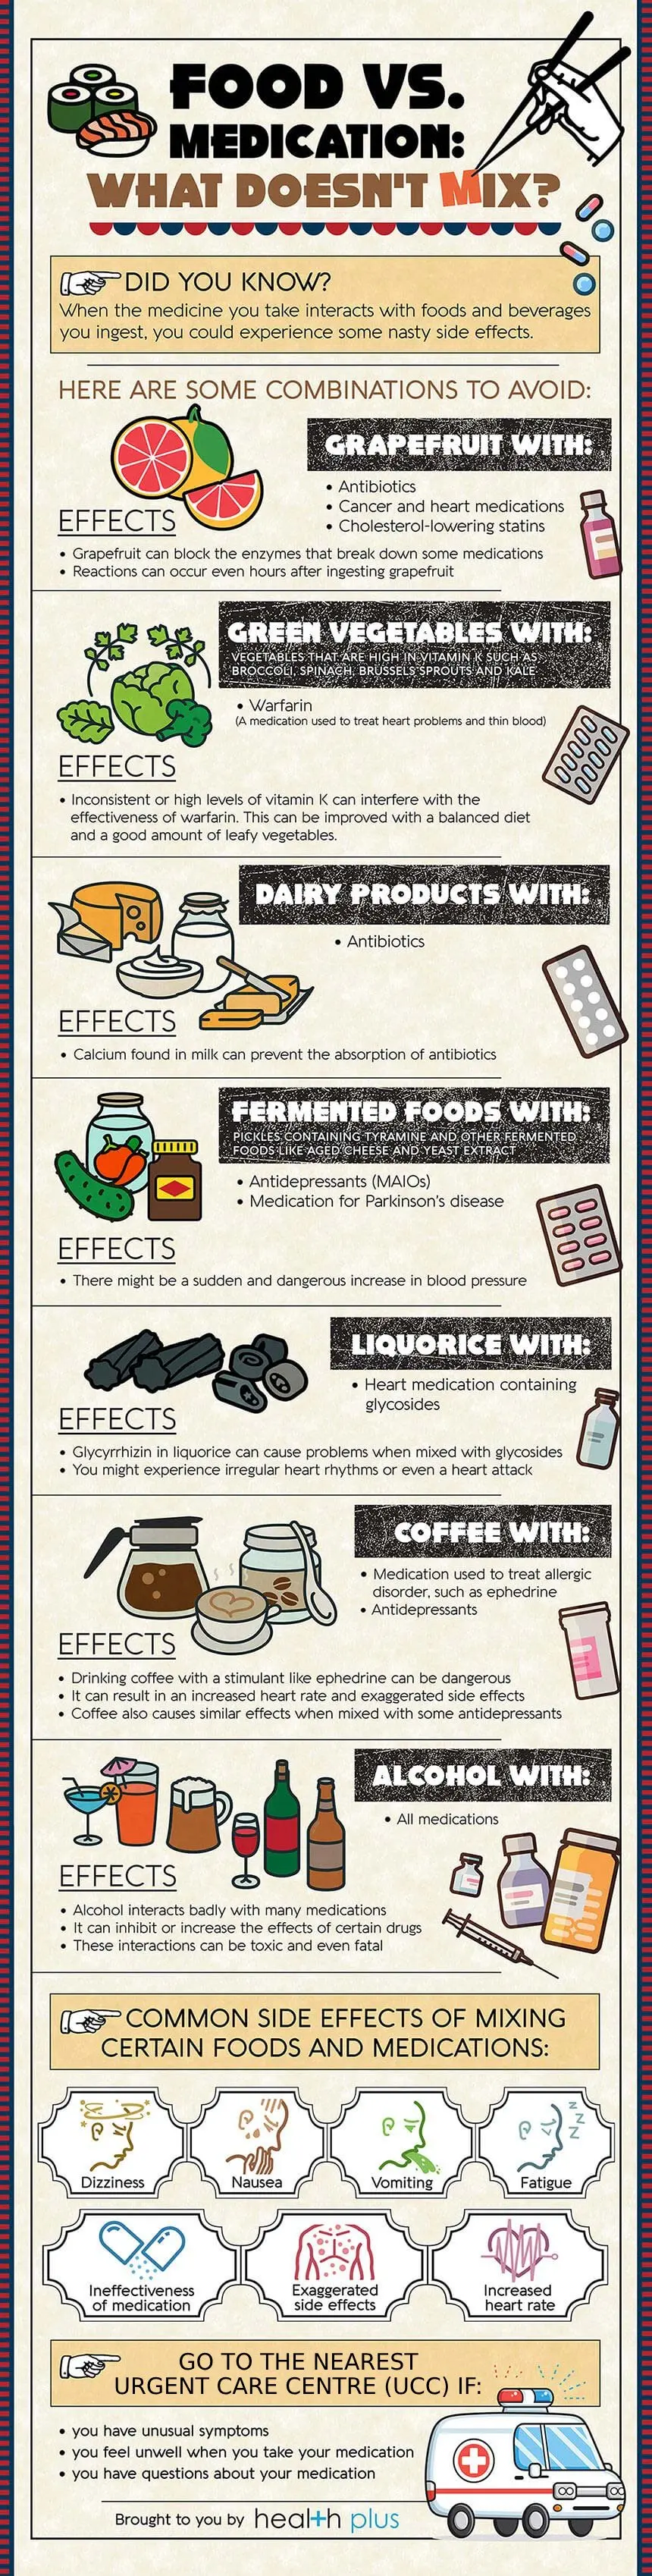 Food and medication combinations